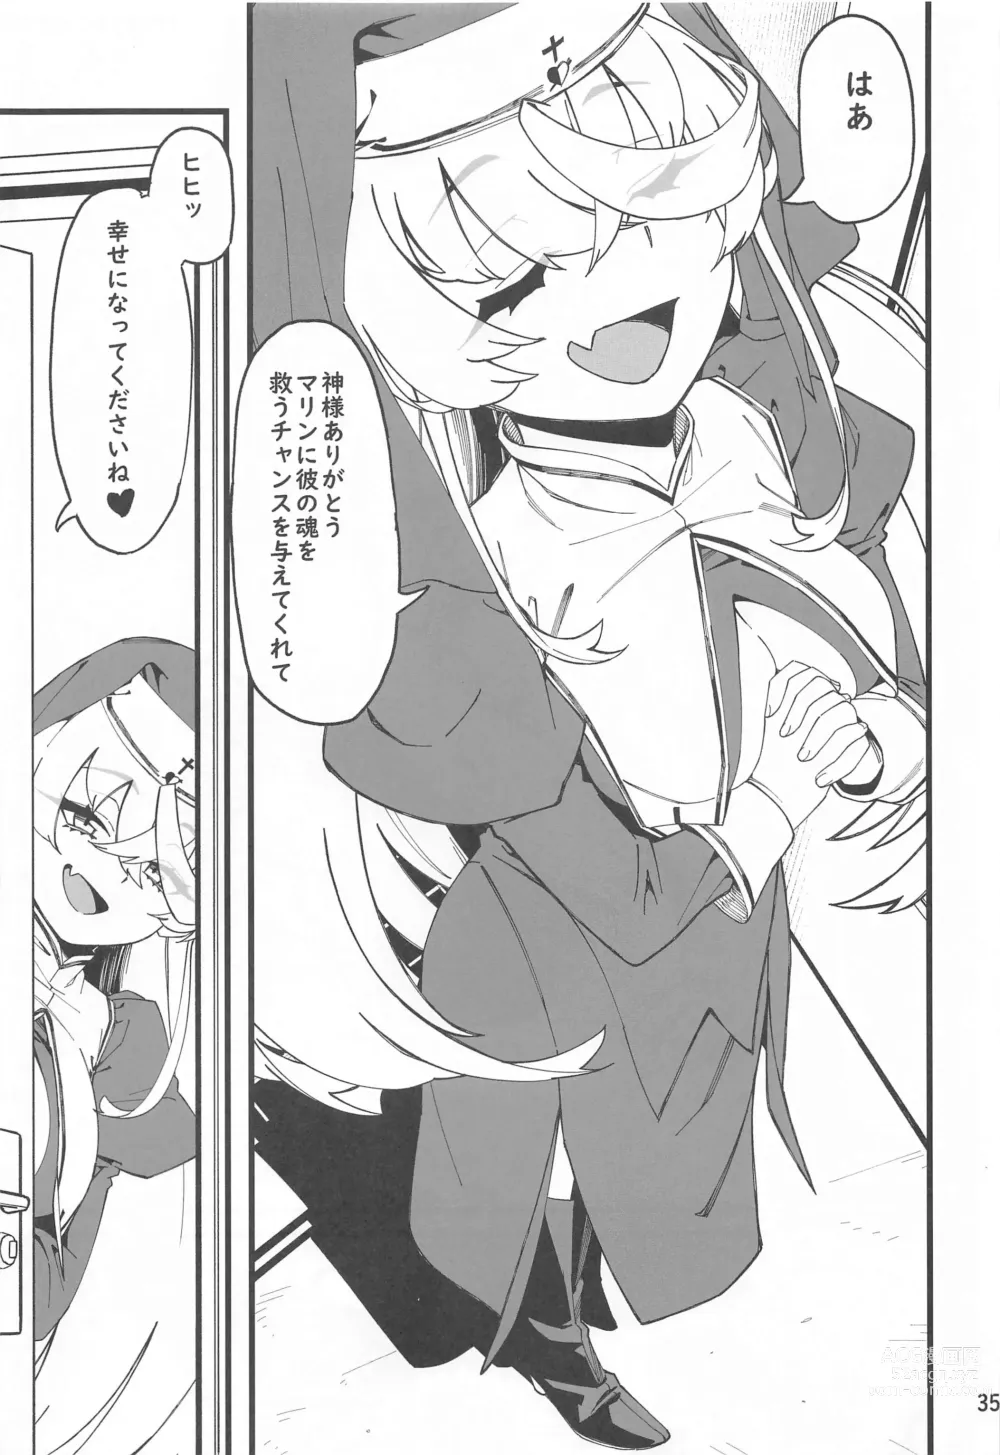 Page 36 of doujinshi IM HORNY